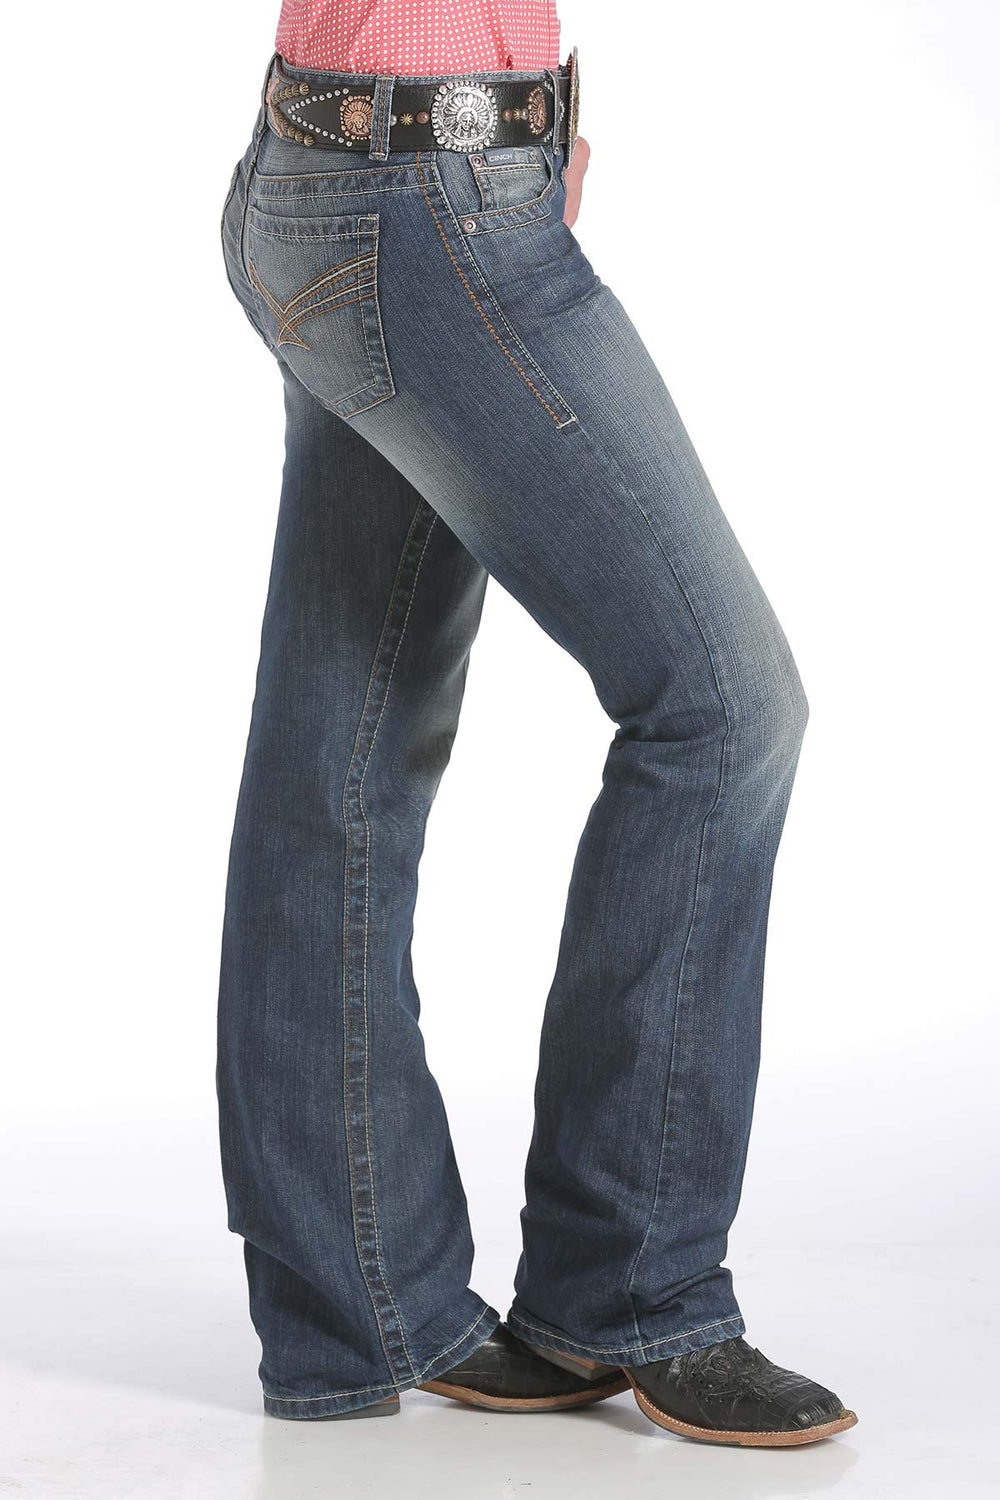 Side view Cinch | Ada Relaxed Fit Mid Rise Medium Stonewash Jean